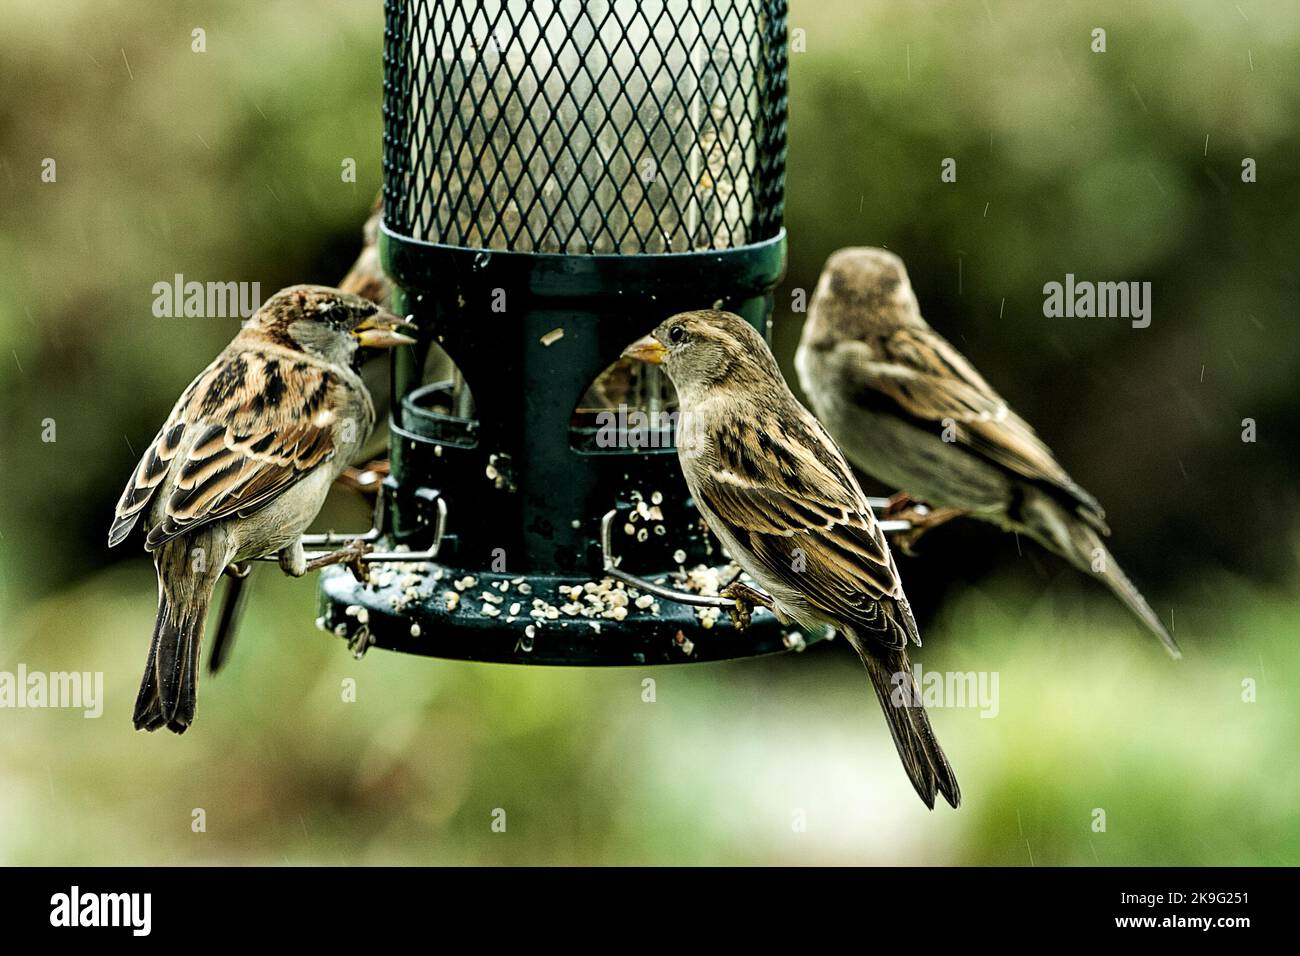 Sparrows being watchful or feeding at birdfeeder on fall day Stock Photo